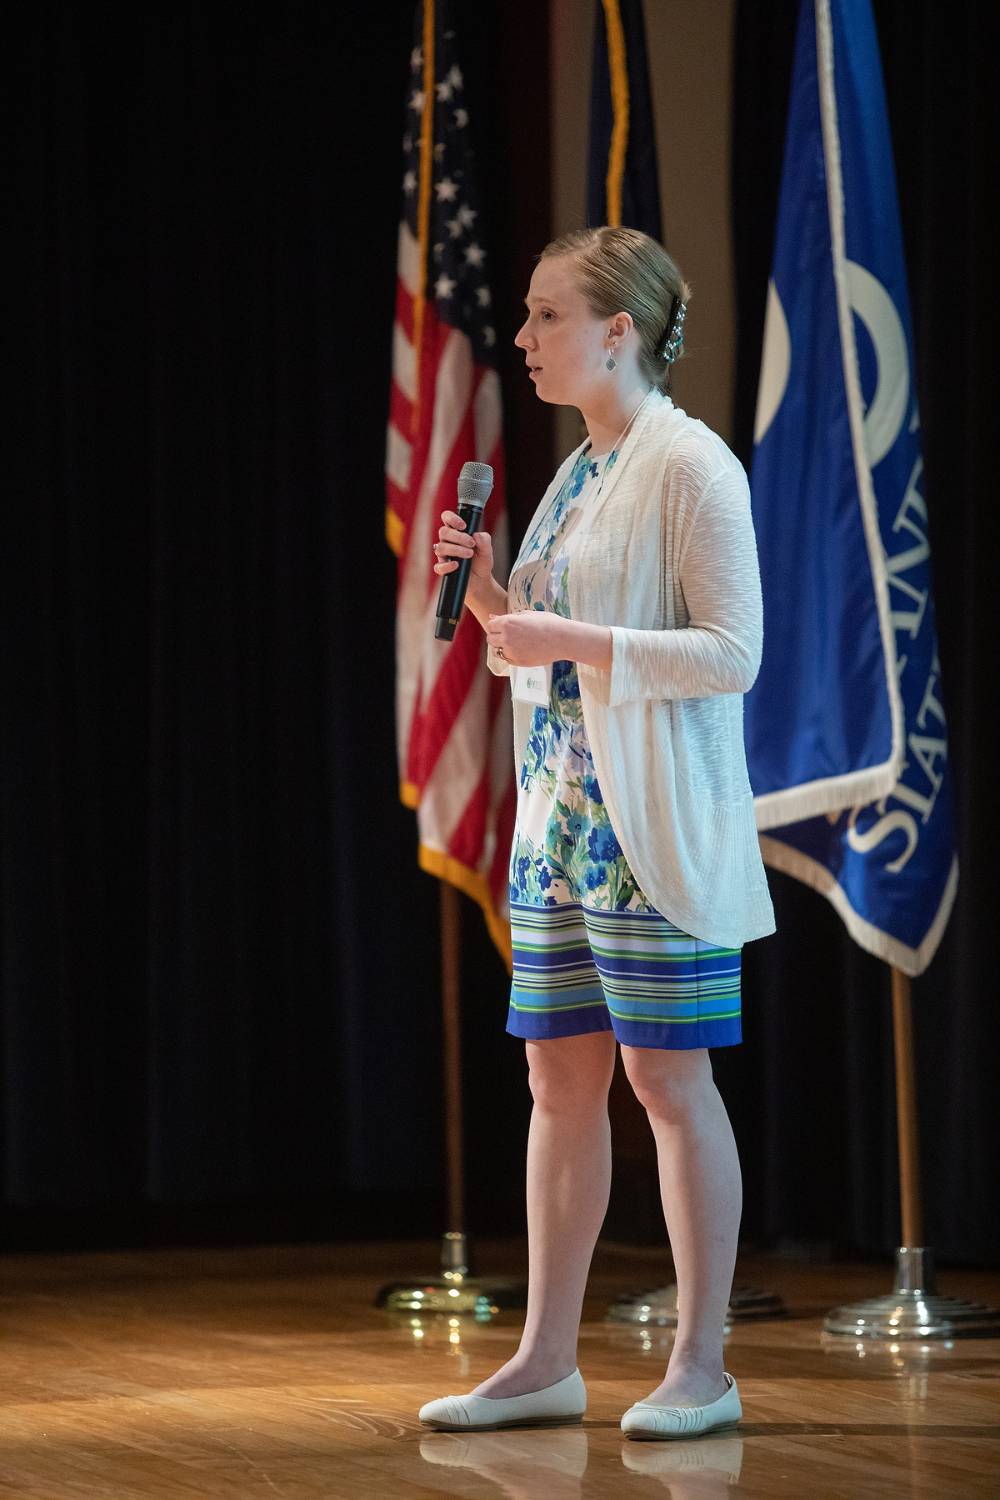 Student standing on stage, speaking to the audience